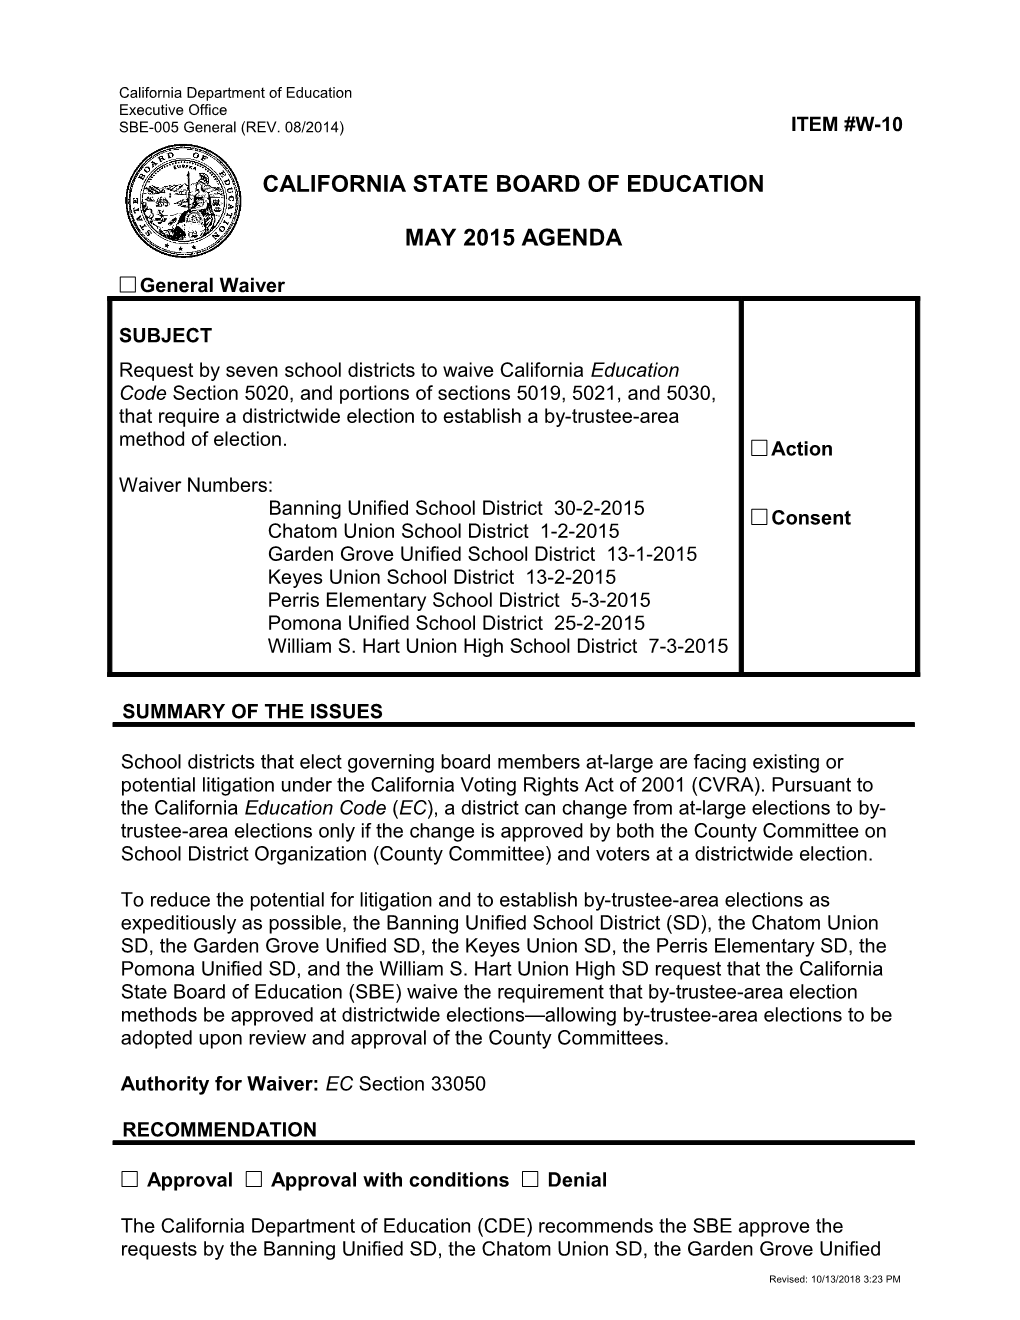 May 2015 Waiver Item W-10 - Meeting Agendas (CA State Board of Education)